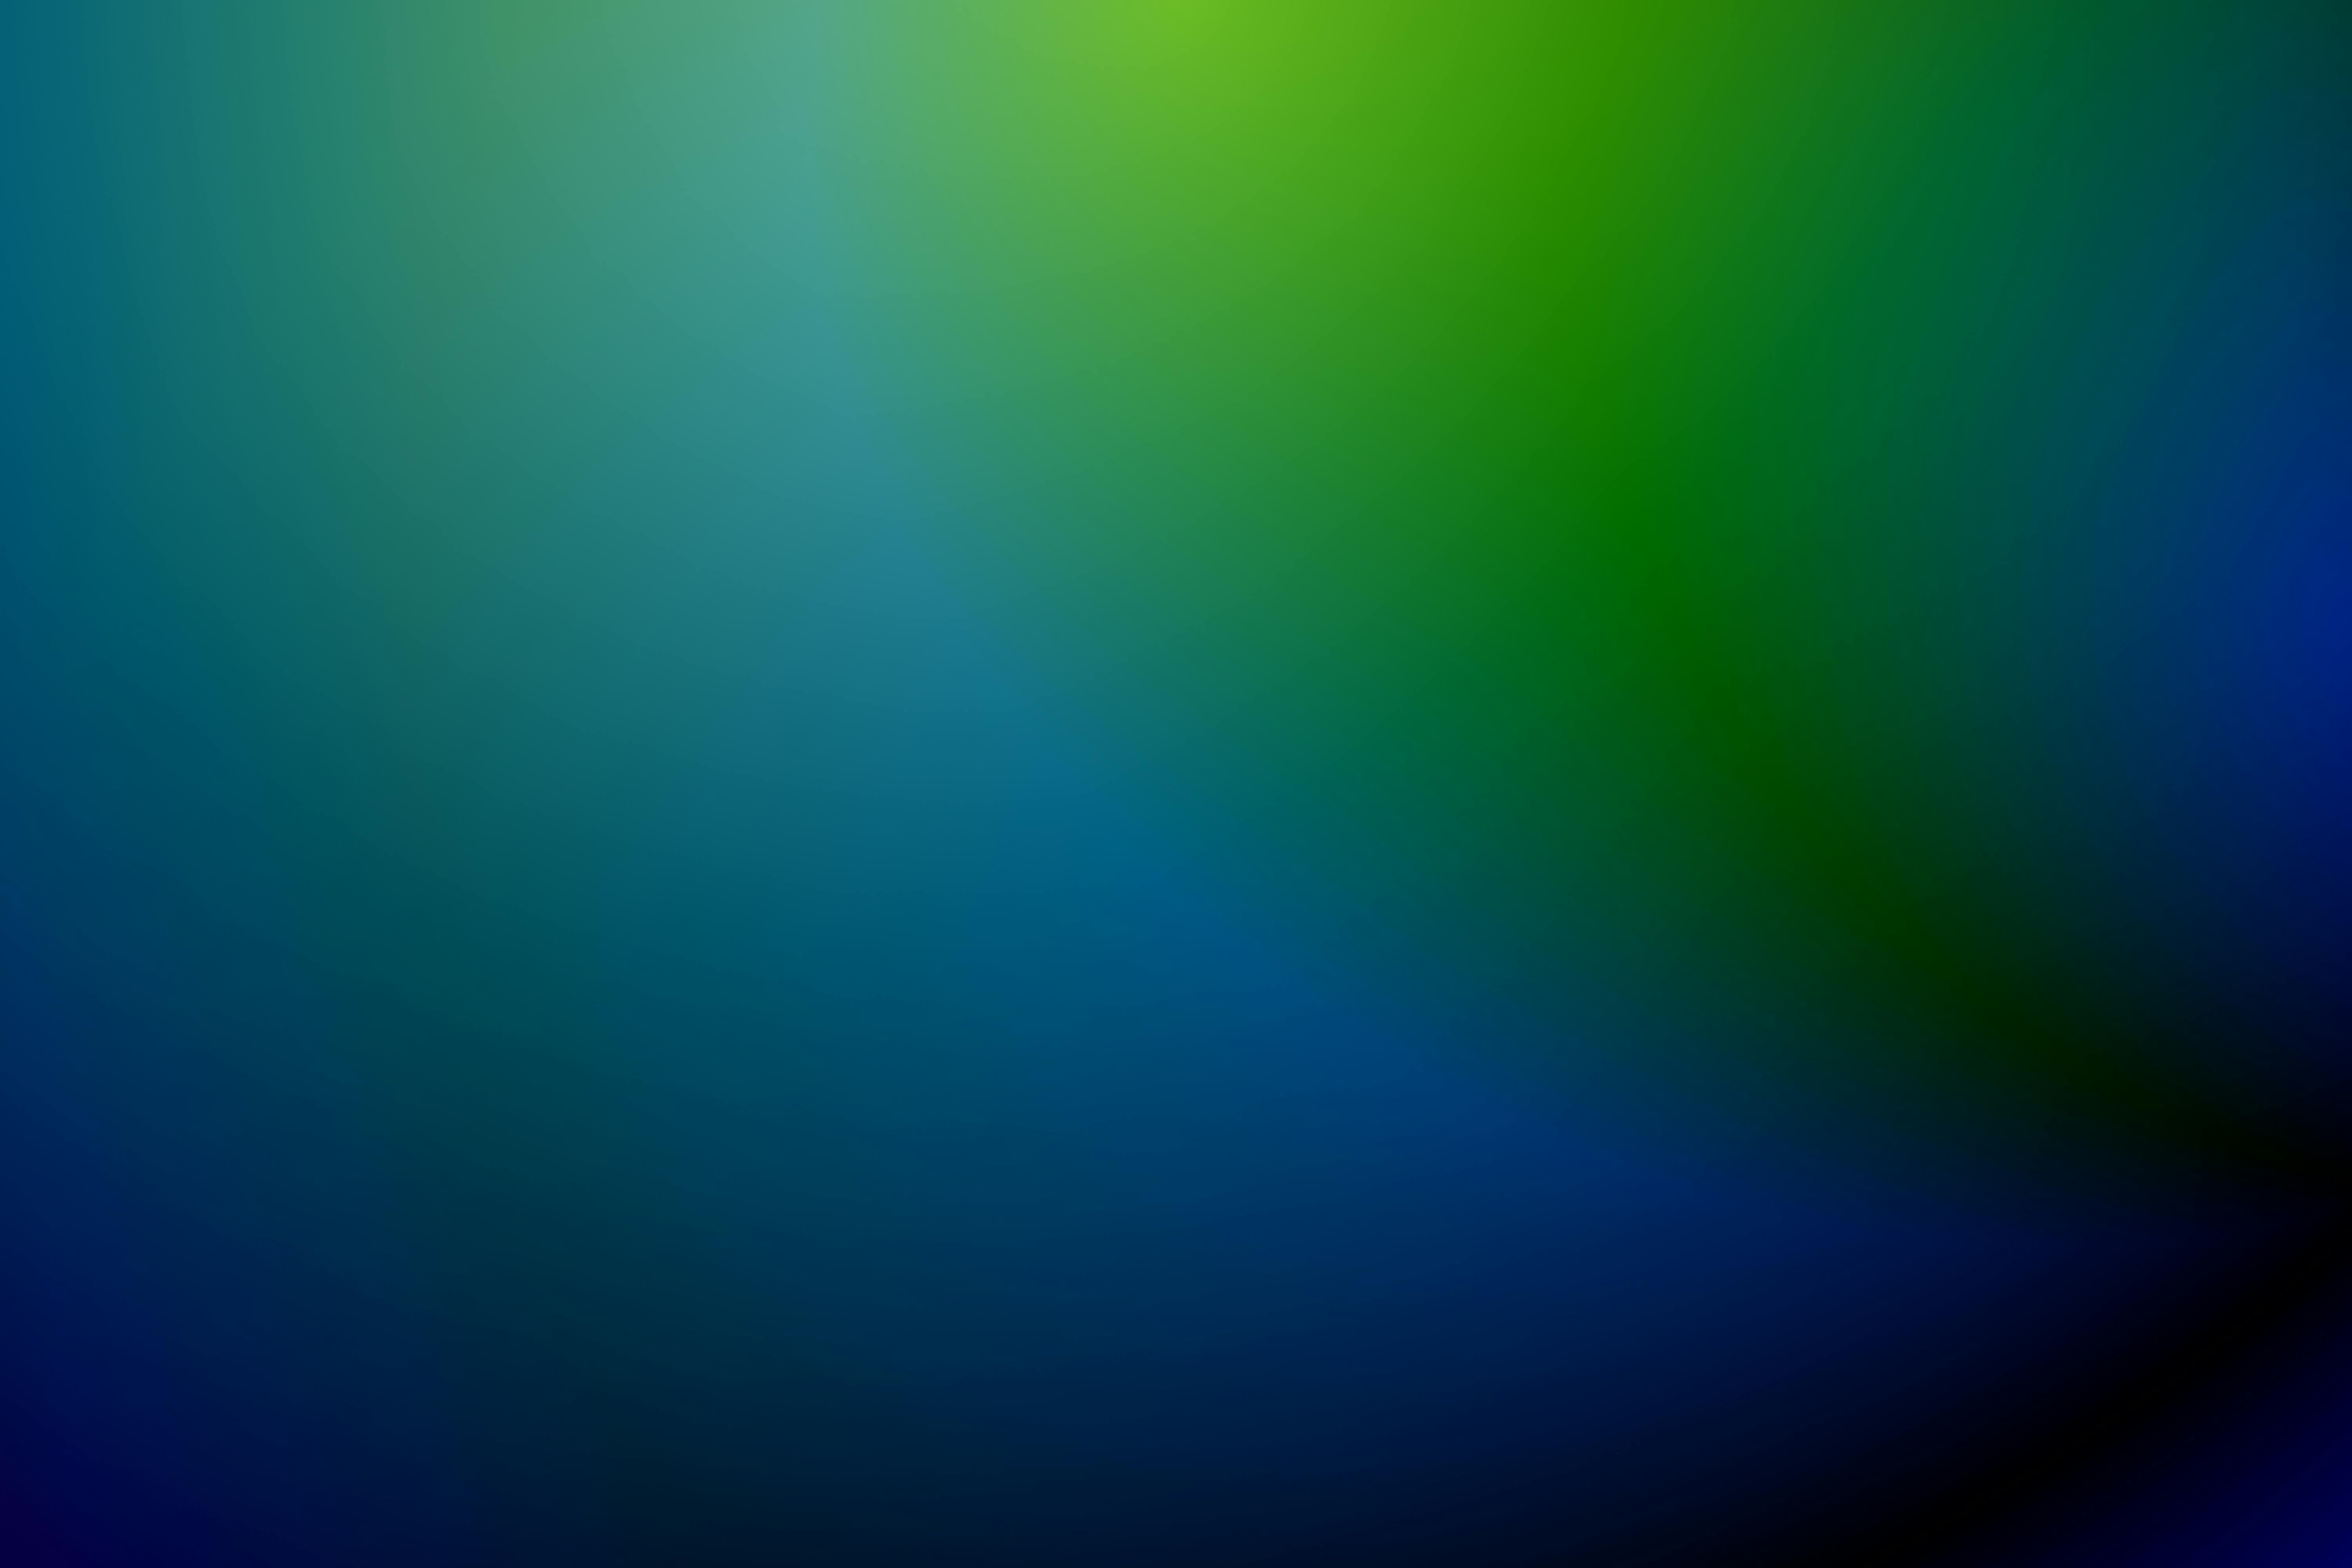 Green and Blue Gradient · Free Stock Photo